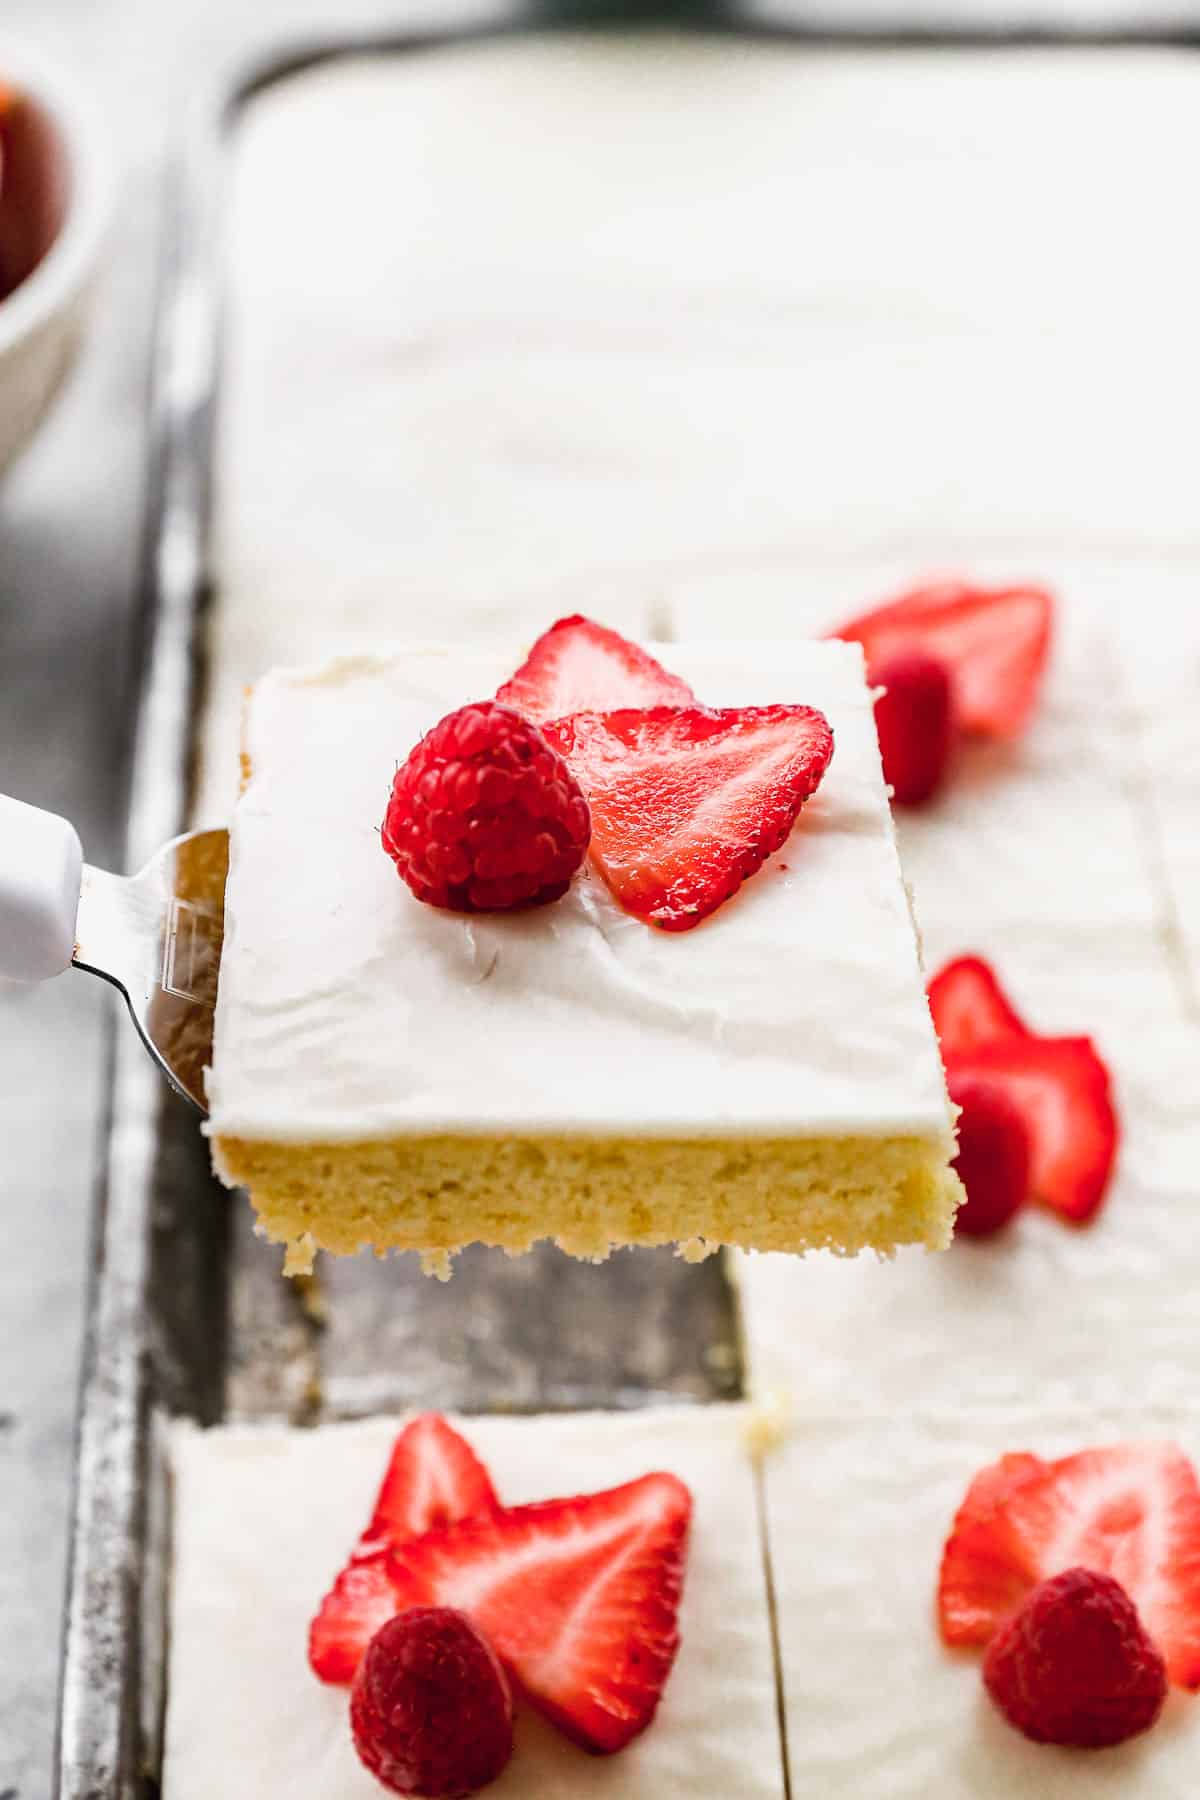 A slice of easy White Texas Sheet Cake being lifted from the pan, topped with a raspberry and sliced strawberries.